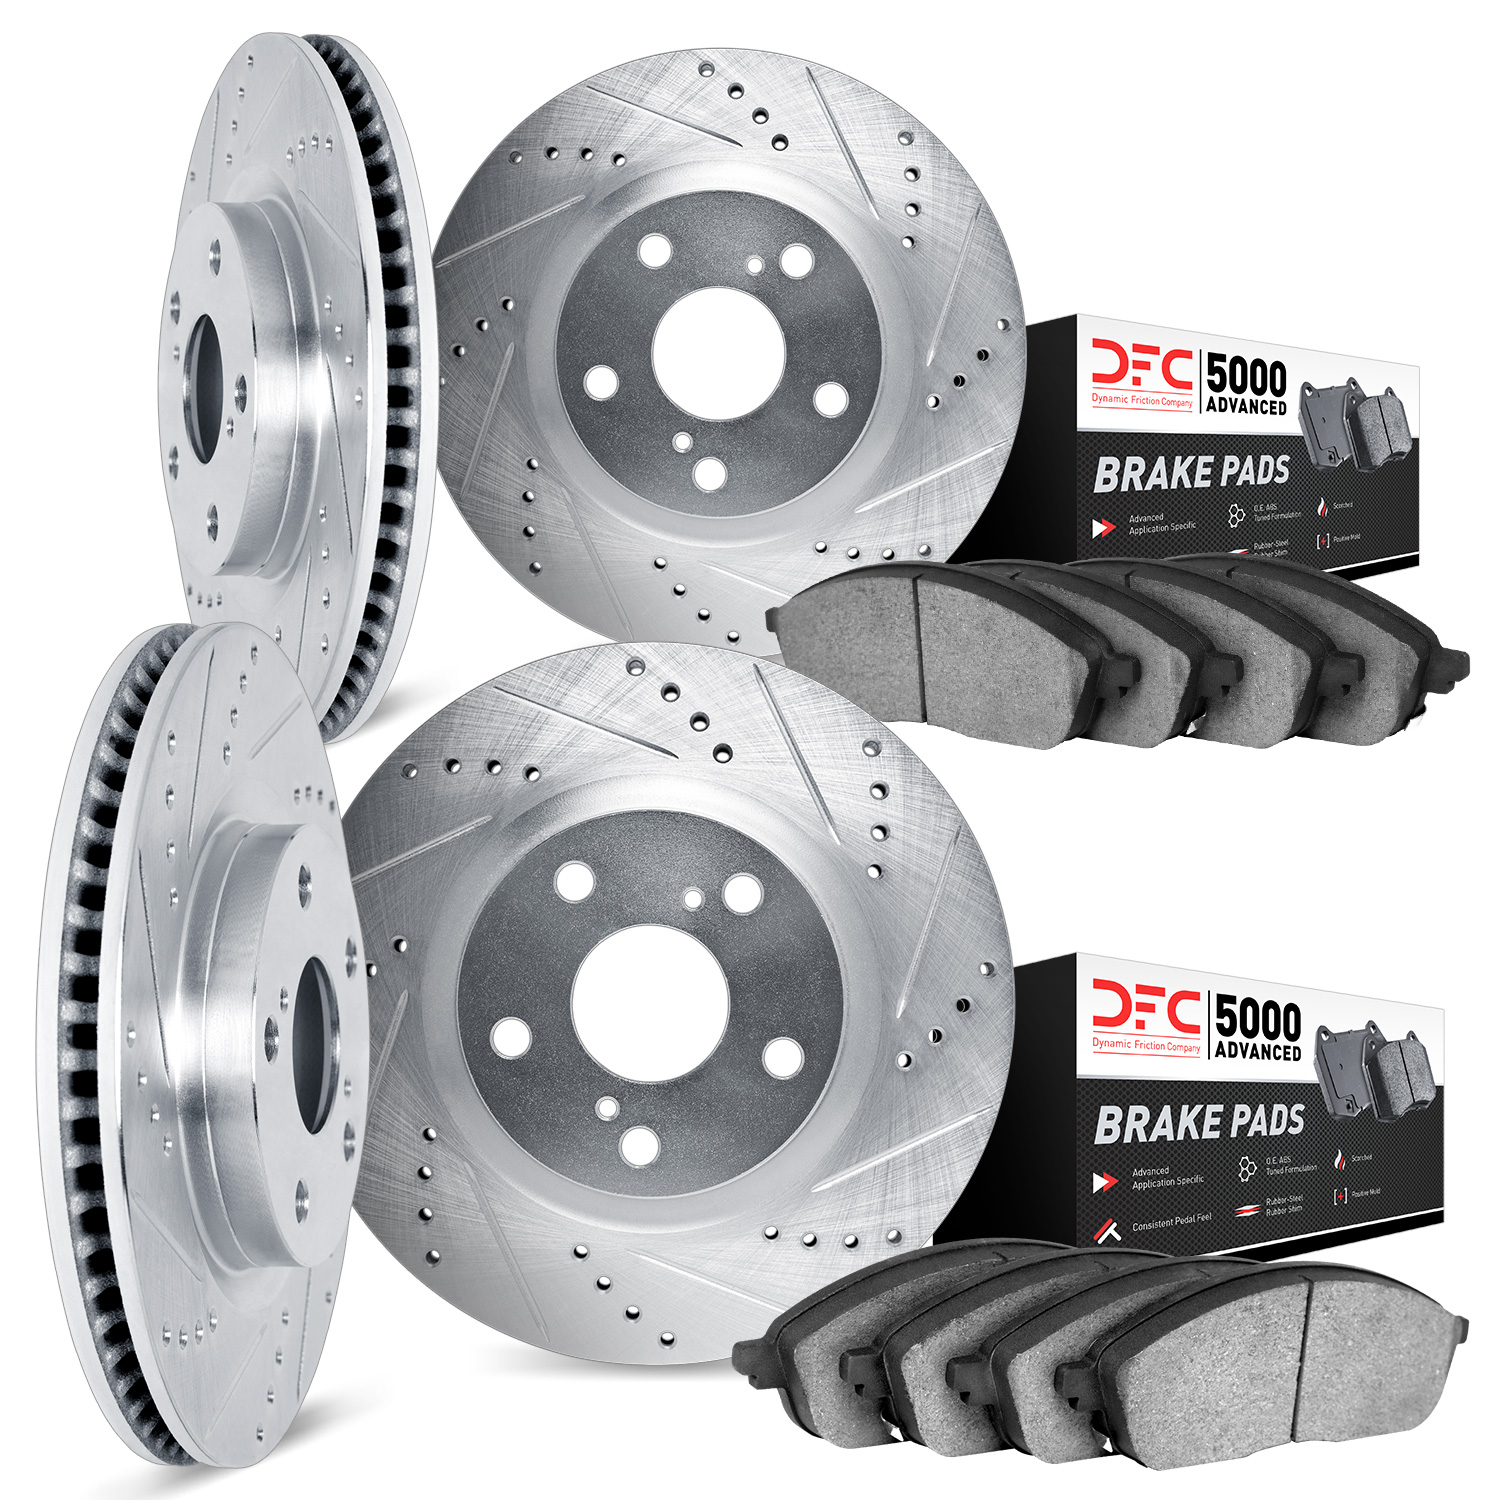 7504-75003 Drilled/Slotted Brake Rotors w/5000 Advanced Brake Pads Kit [Silver], 1993-1998 Lexus/Toyota/Scion, Position: Front a